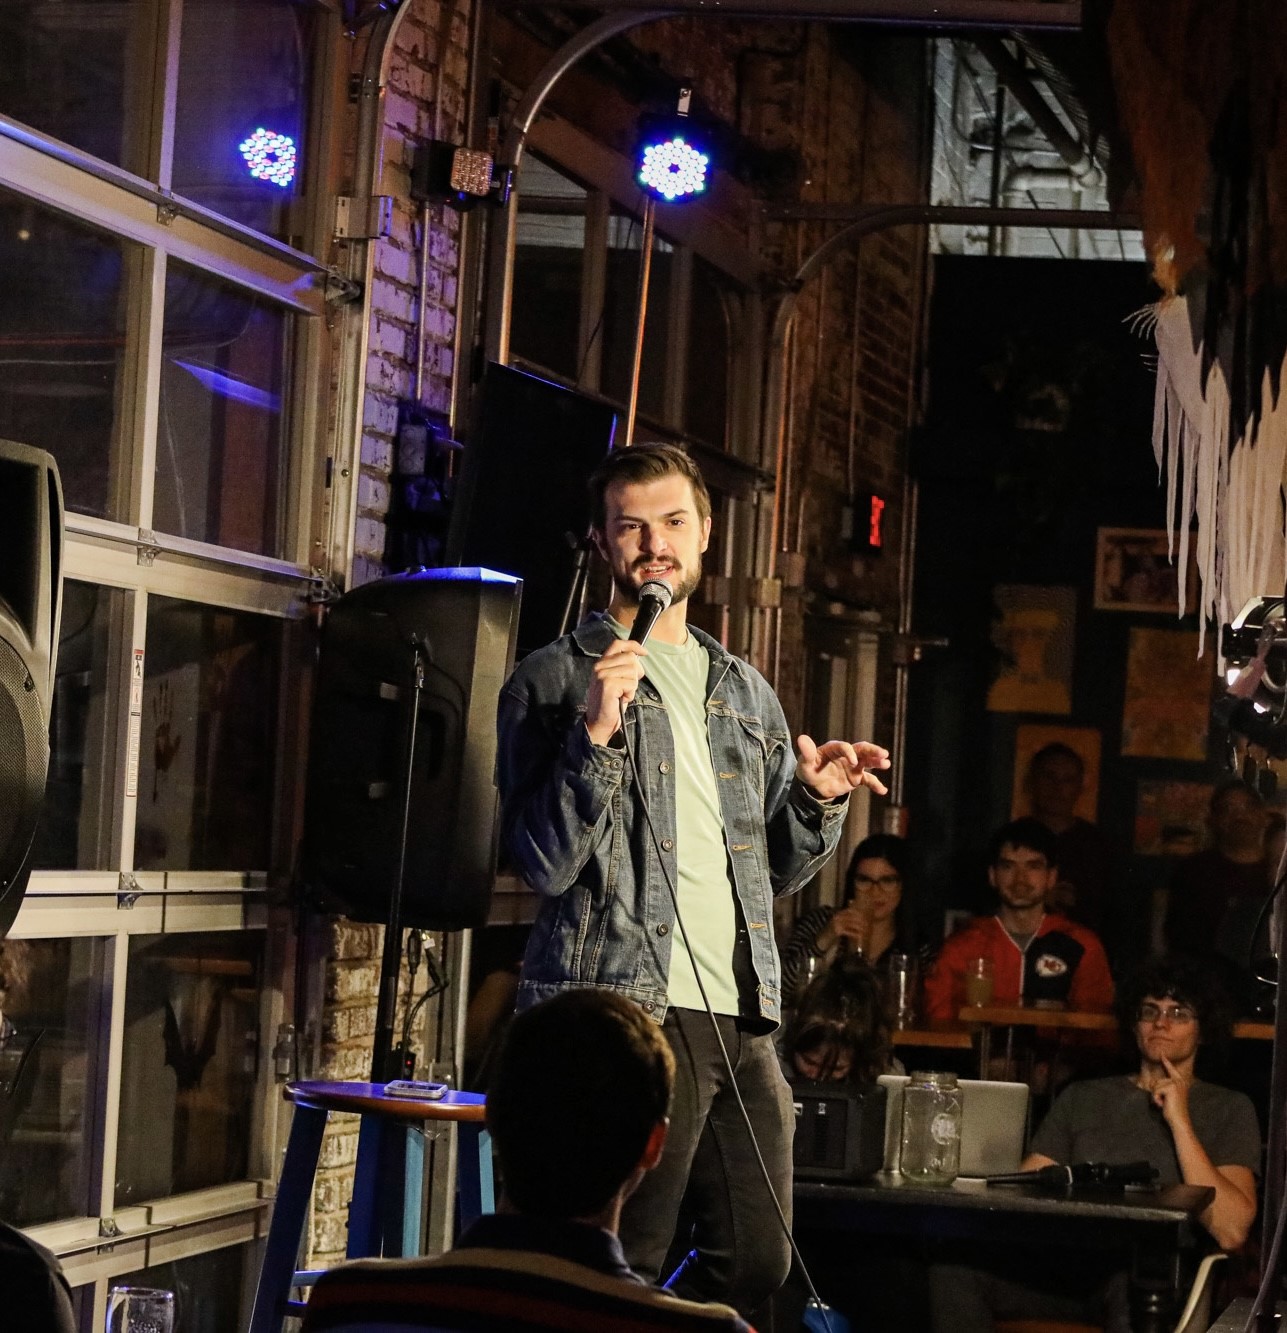 Tyler Ross - Fri. 7:30PM Show Funny Stop Comedy Club on may. 24, 19:30@Funny Stop Comedy Club - Compra entradas y obtén información enFunny Stop funnystop.online